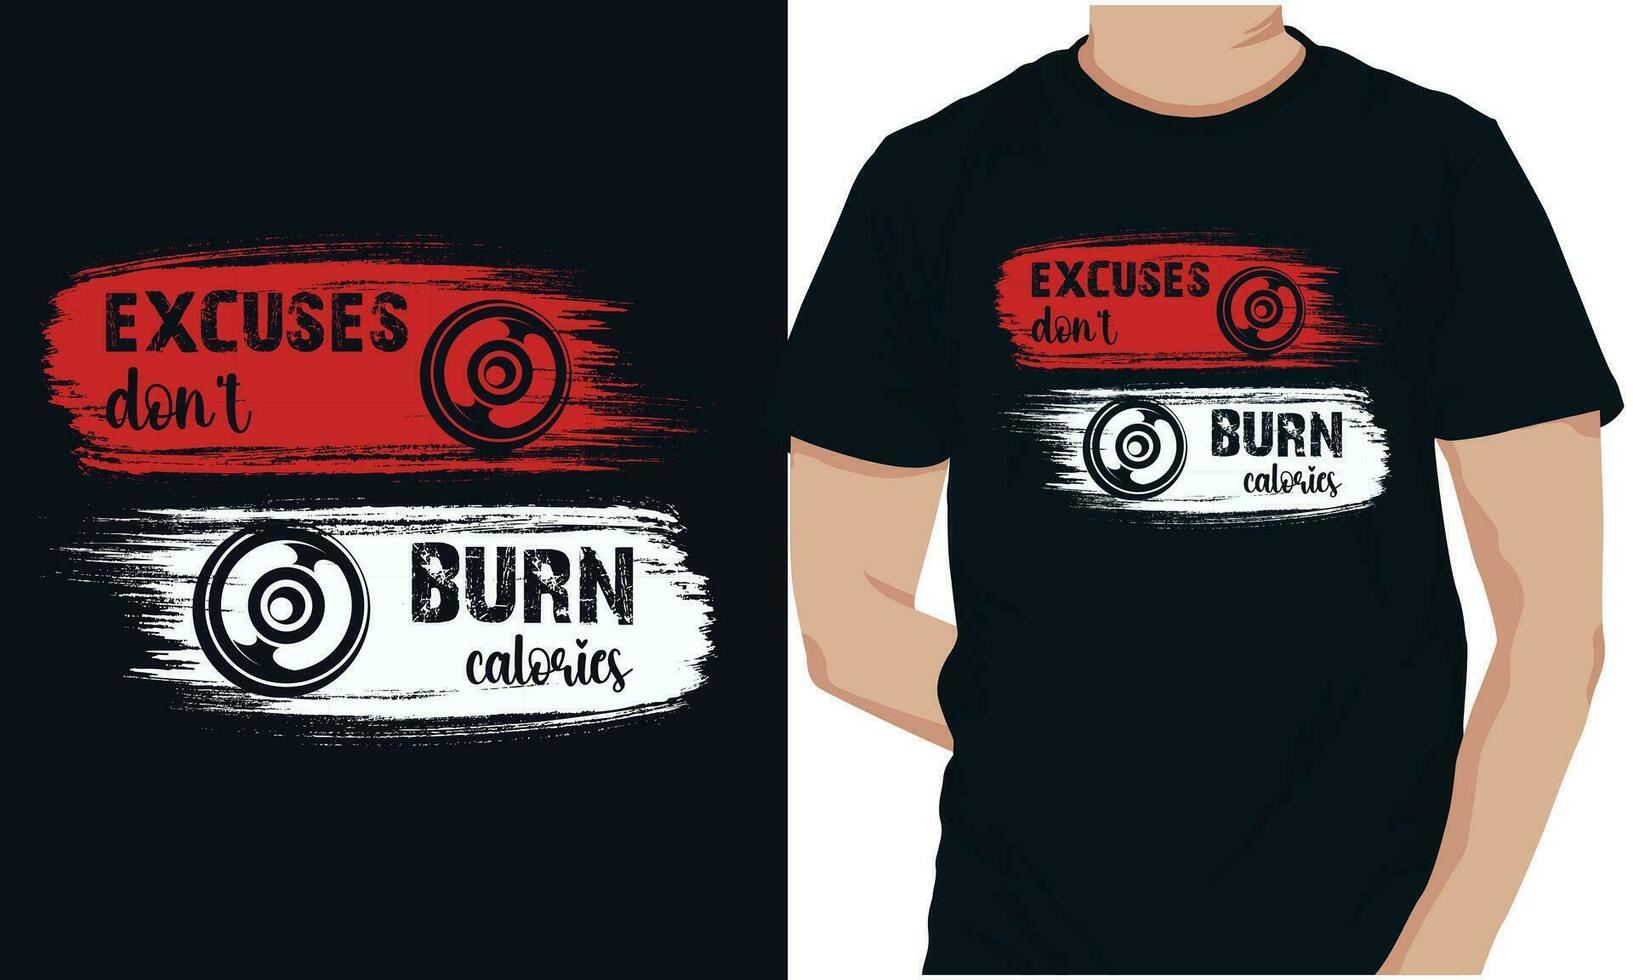 EXCUSES DON T BURN CALORIES Gym Fitness t-shirts Design vector